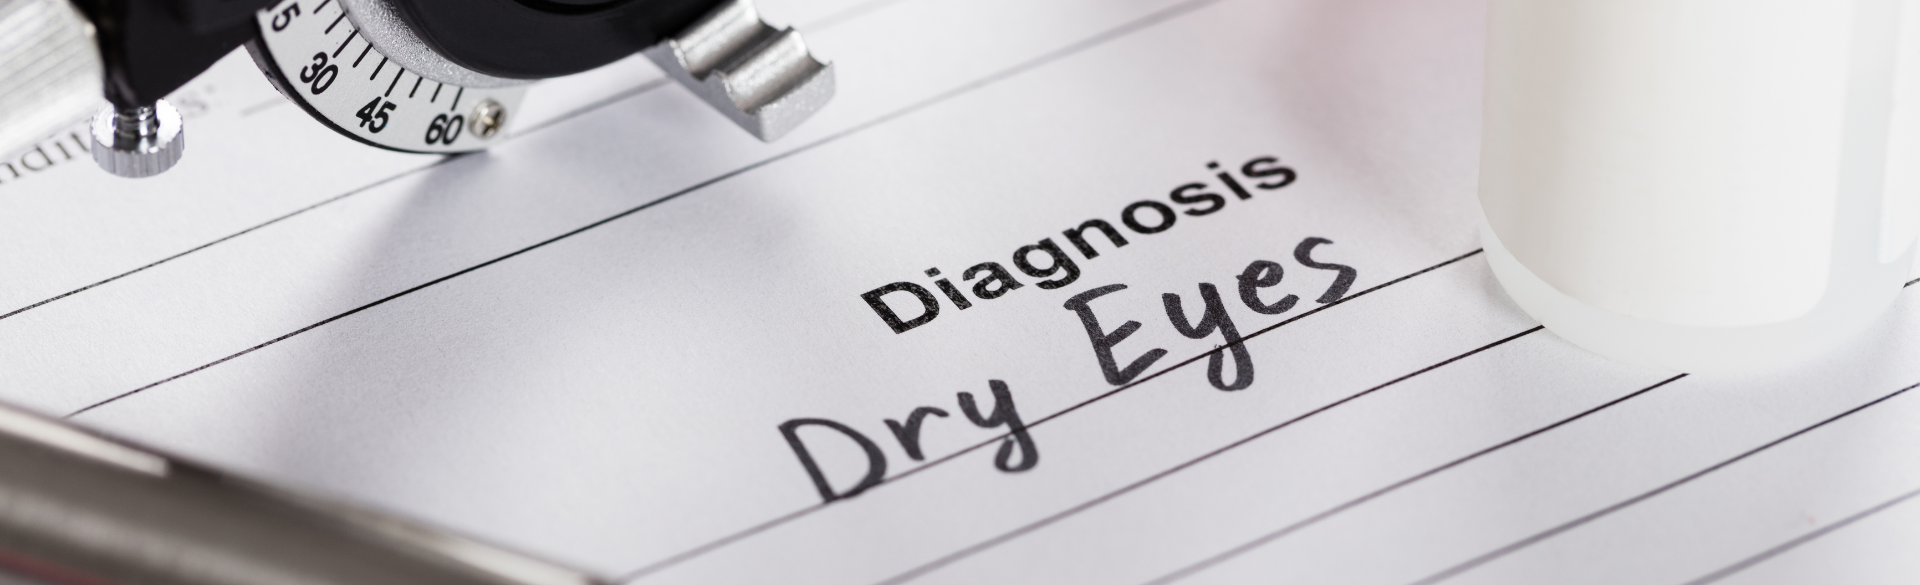 Nasal Spray Provides a Novel Approach to Treatment of Dry Eyes |  Sue Anschutz-Rodgers Eye Center